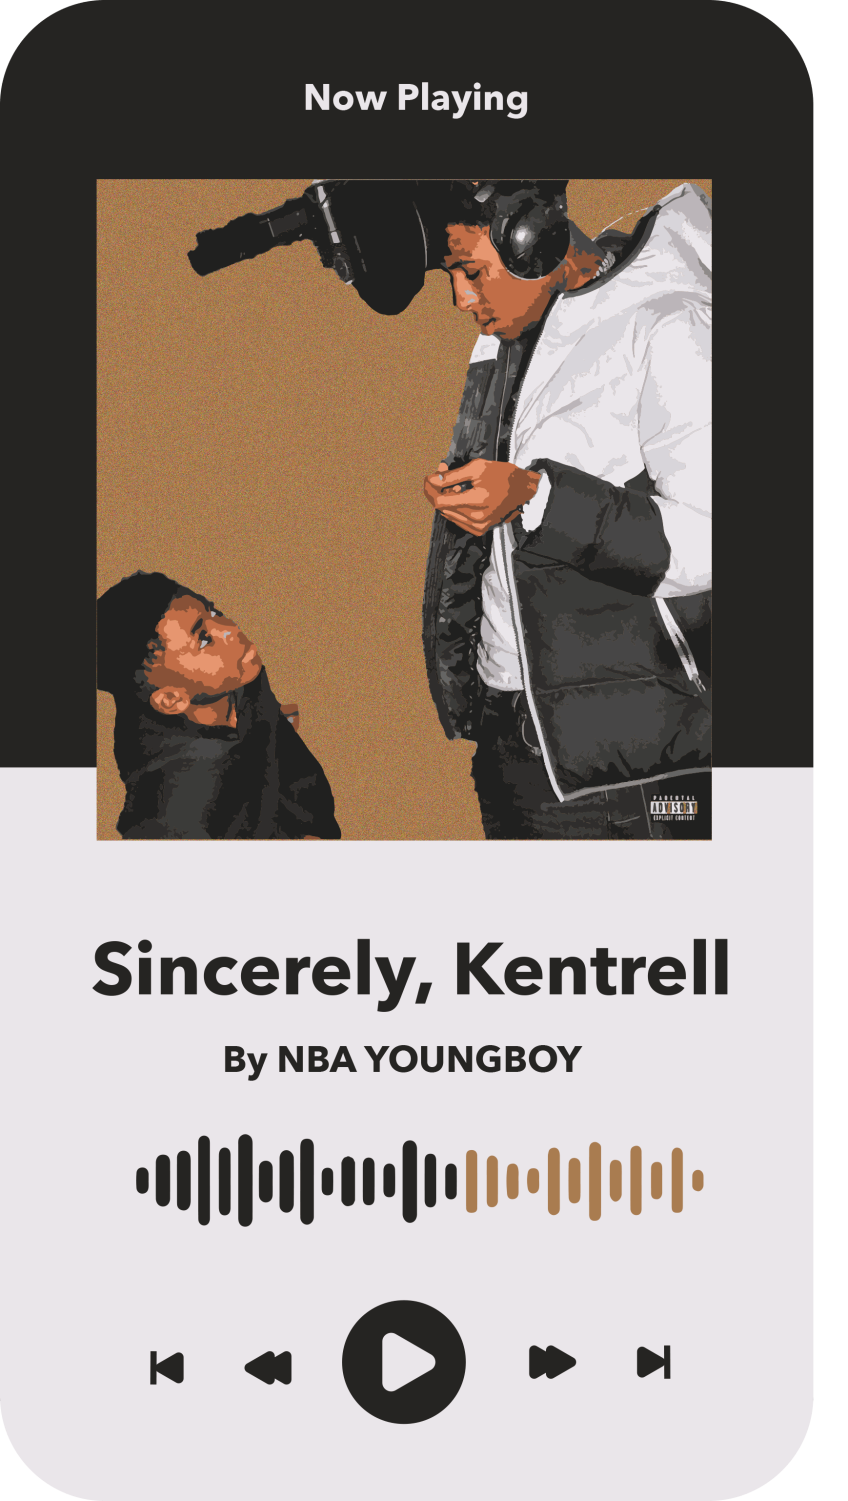 Rashads Records NBA Youngboy returns in a big way with “Sincerely, Kentrell”